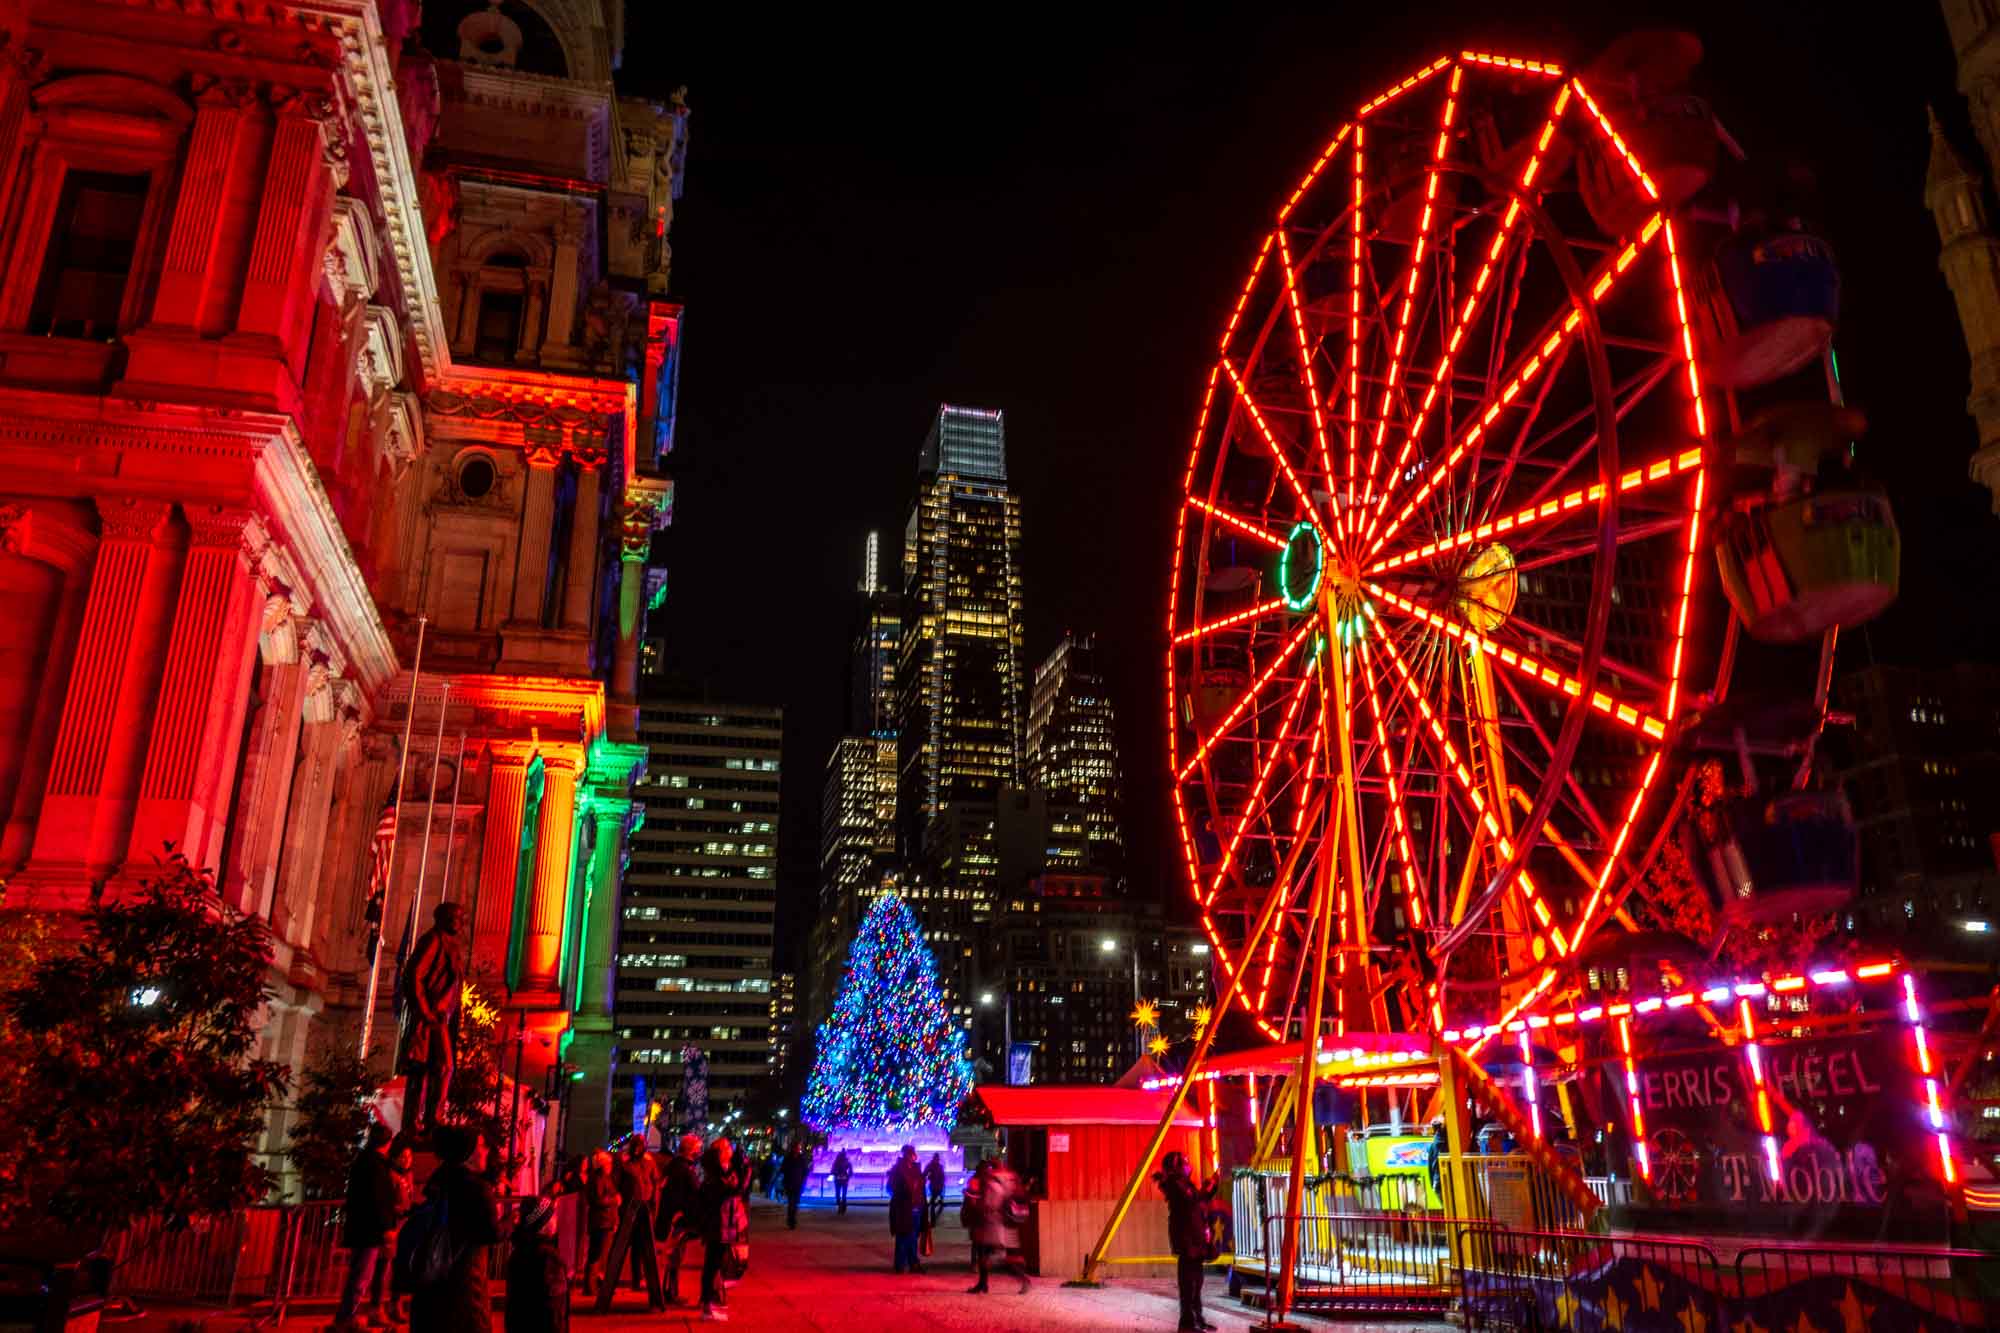 Ferris wheel lit up with red lights at night with a lit up Christmas tree and city buildings in the background.